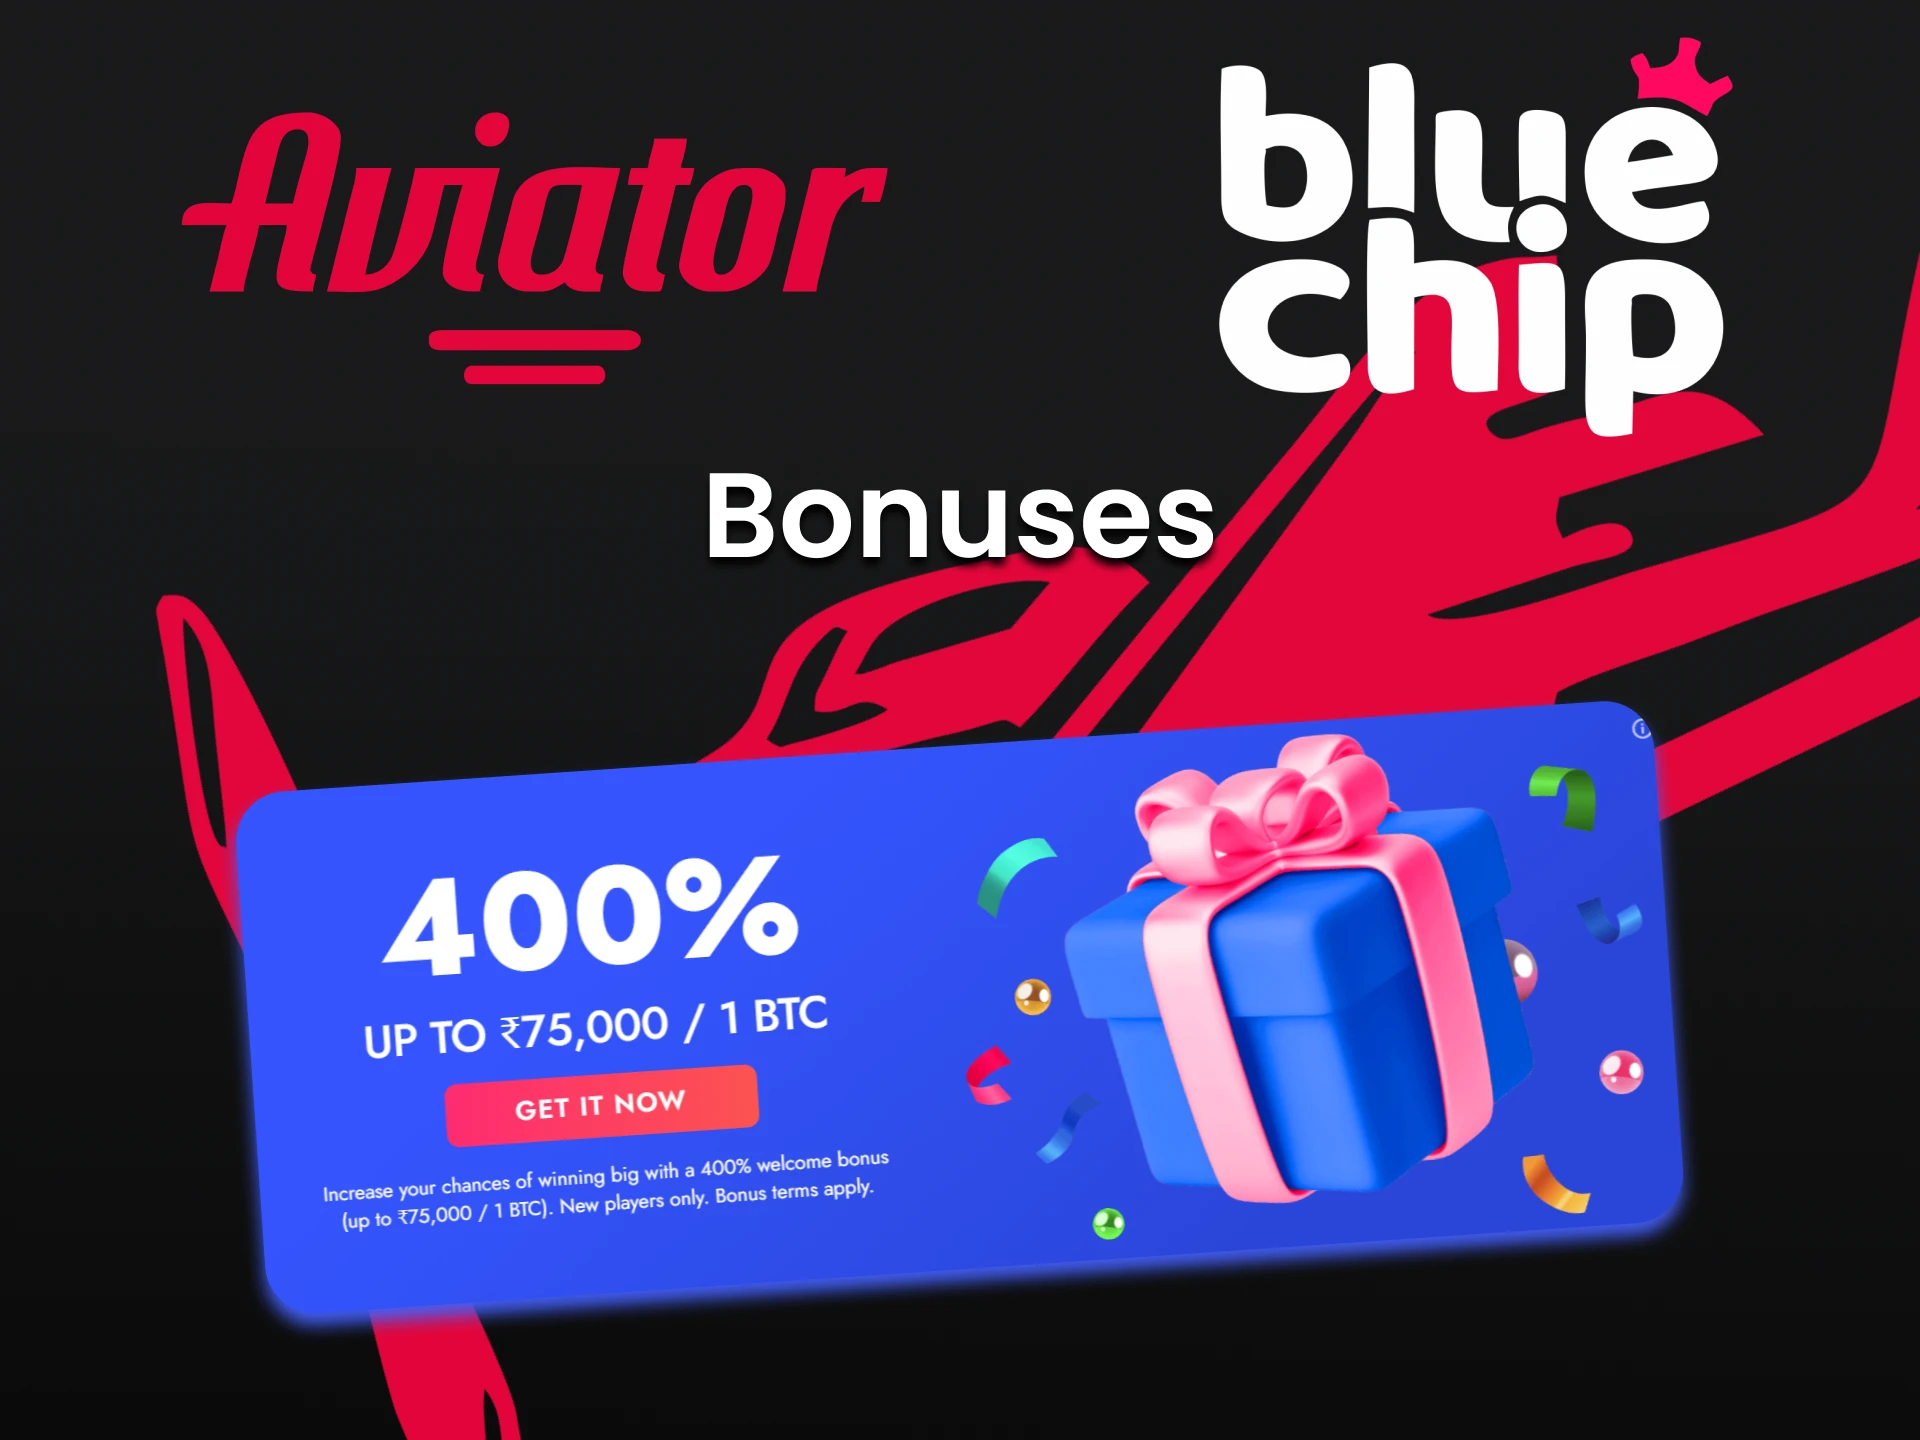 Get a lot of bonuses for games from Bluechip.